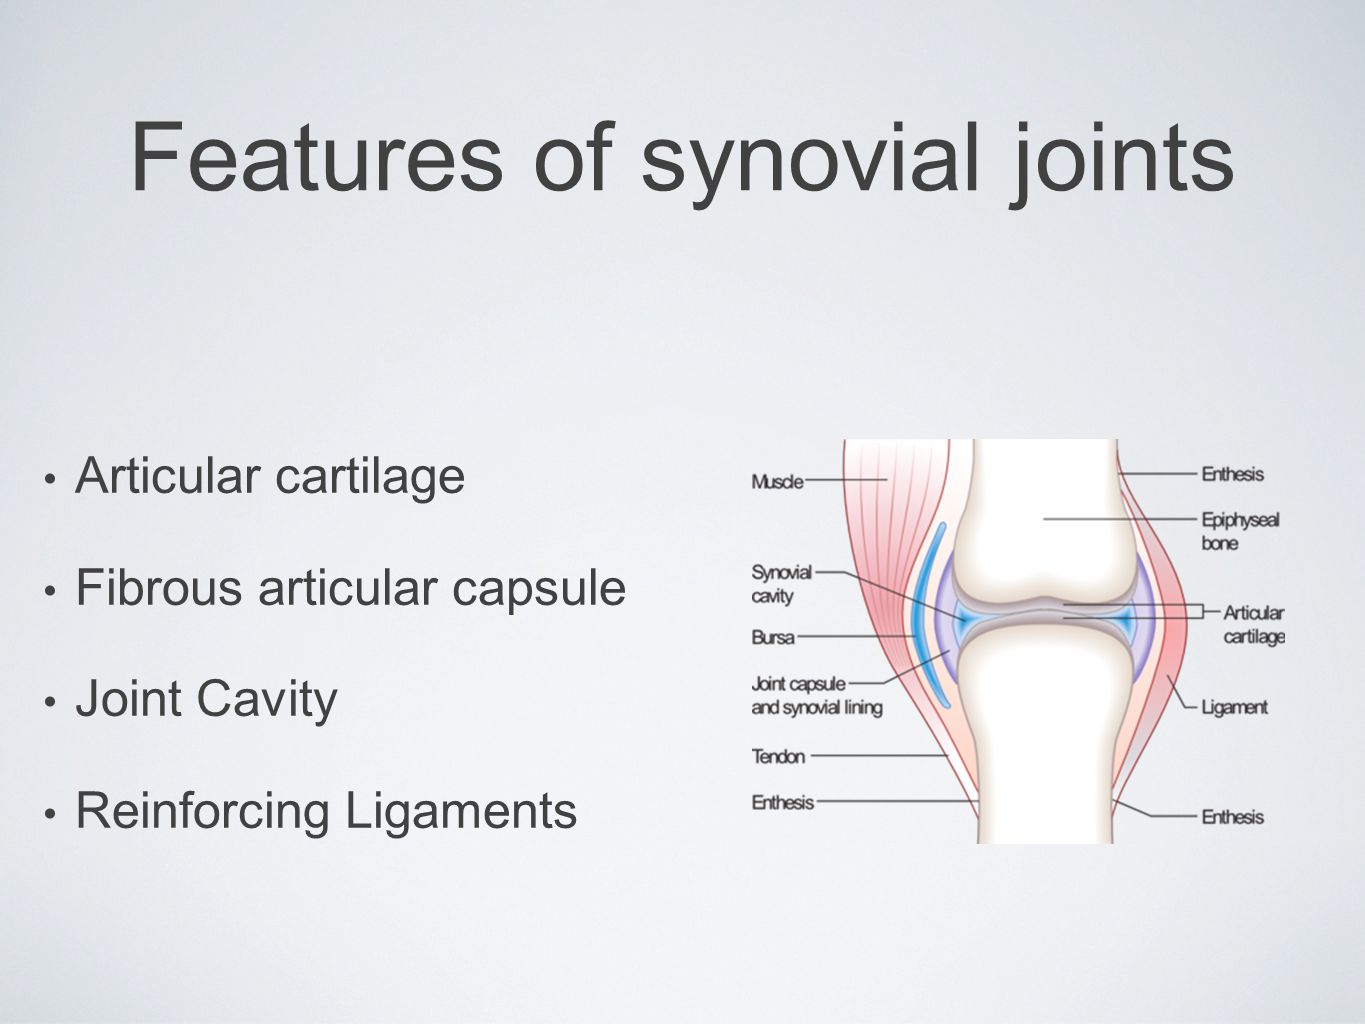 Features of synovial joints